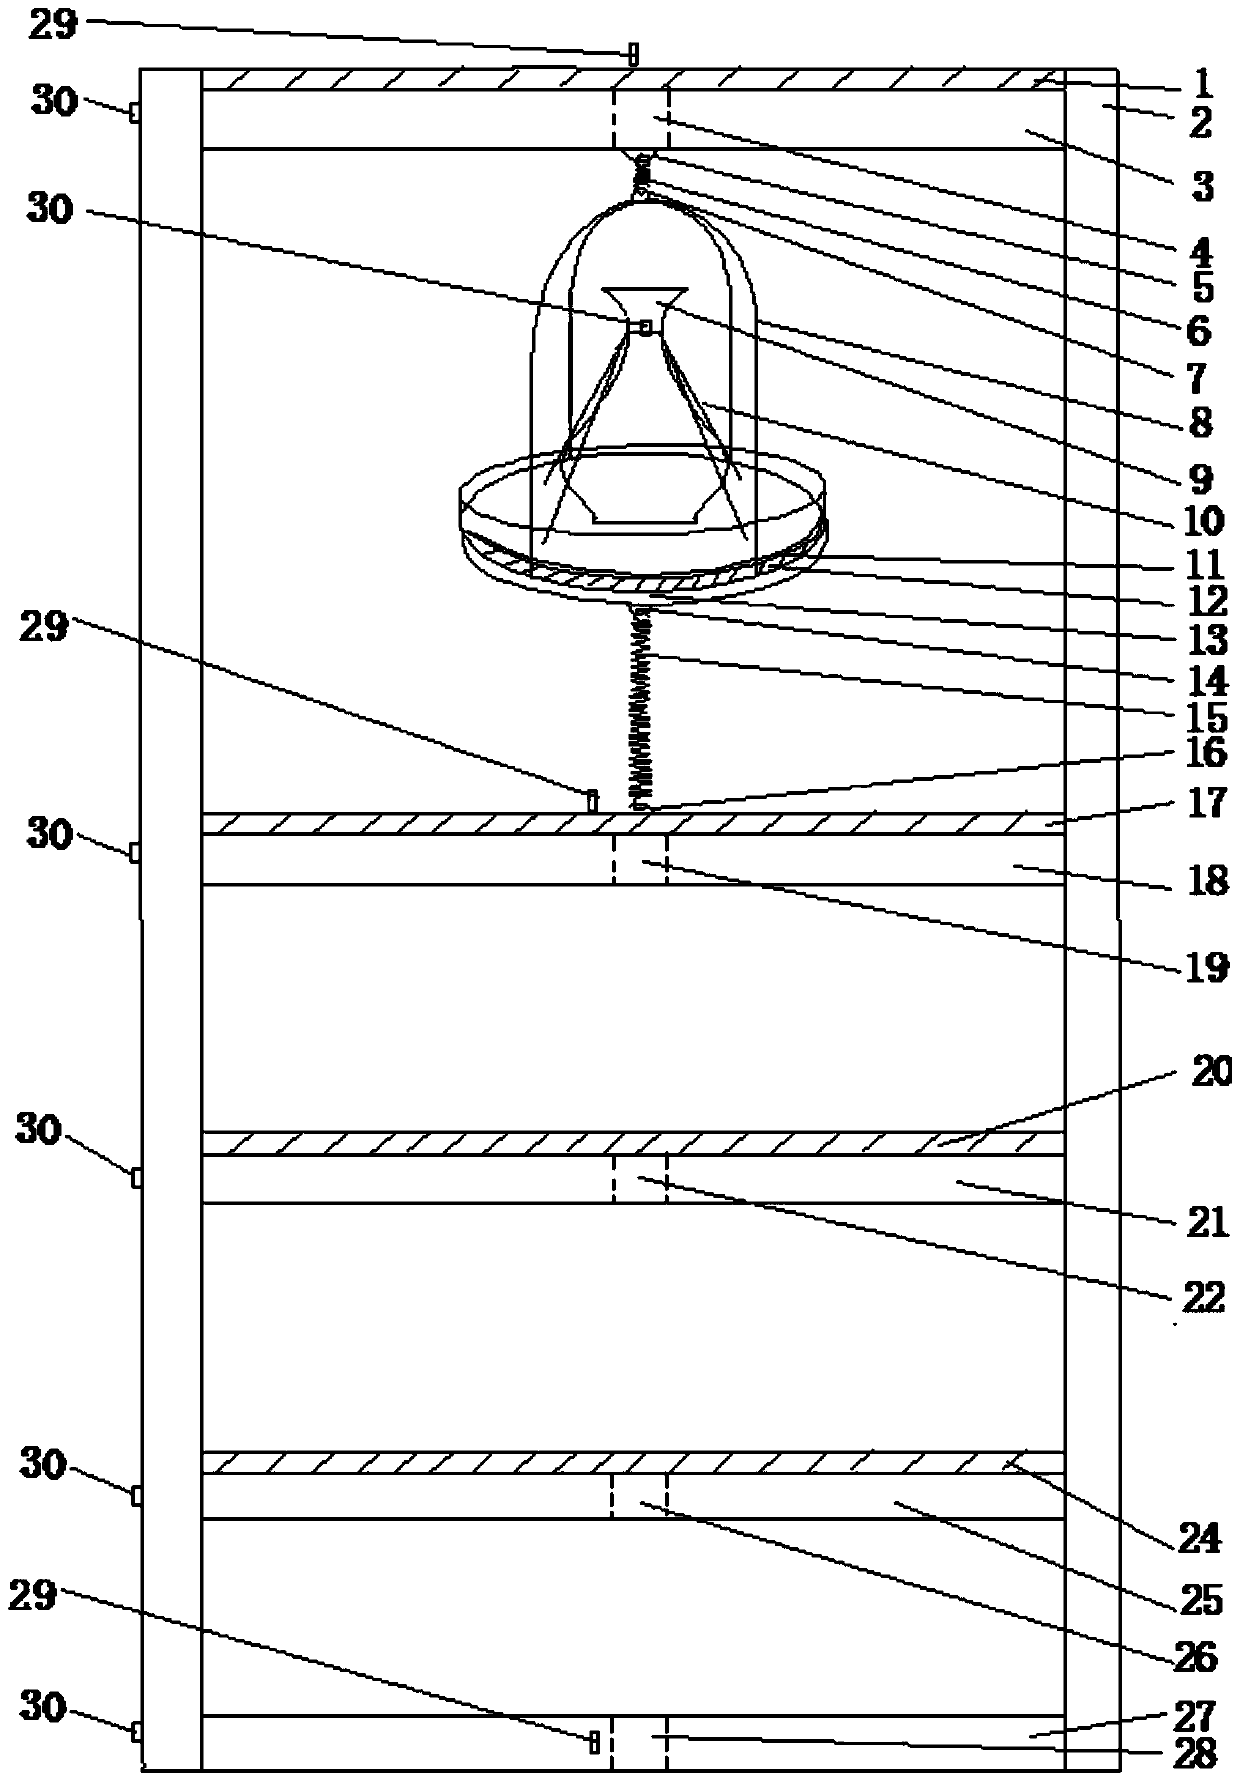 Anti-shock suspension vibration reduction control method and device for museum cultural relics system